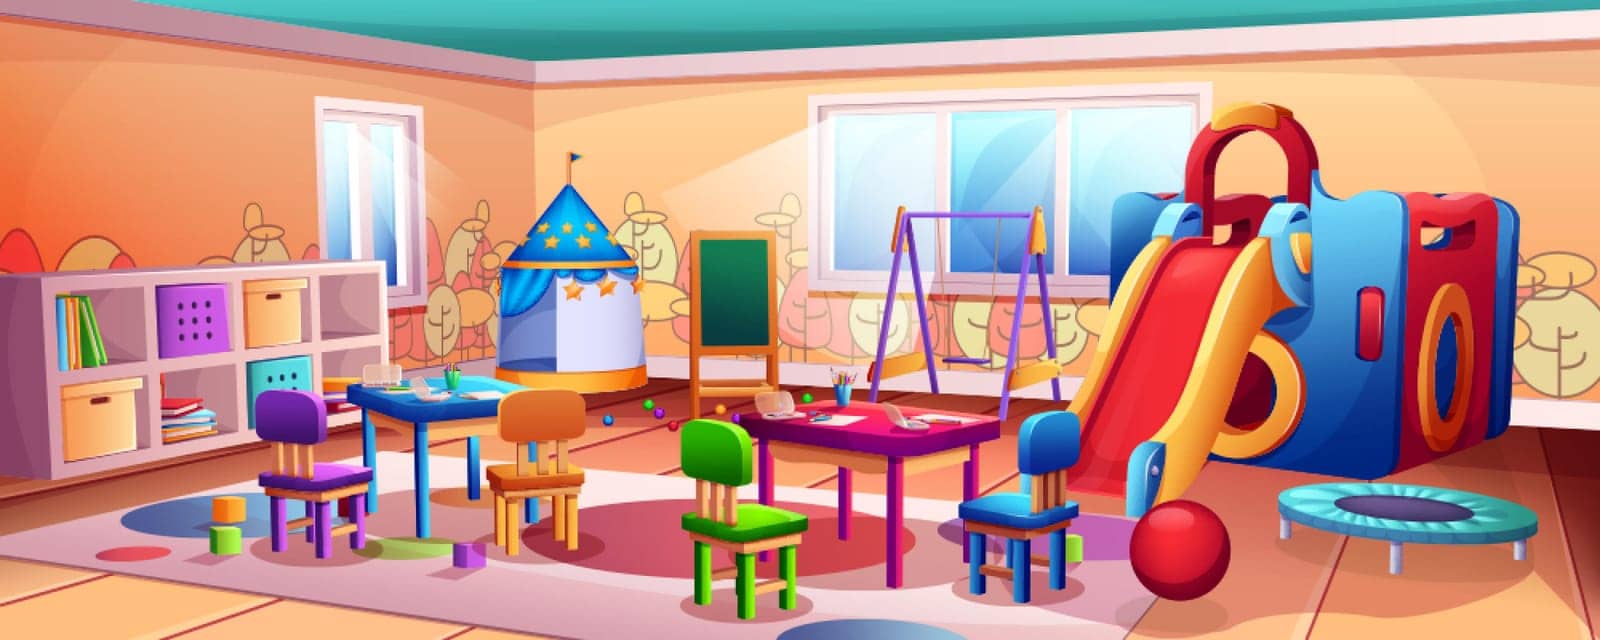 Cartoon kindergarten interior with toys, tables and kids play area by Redgreystock